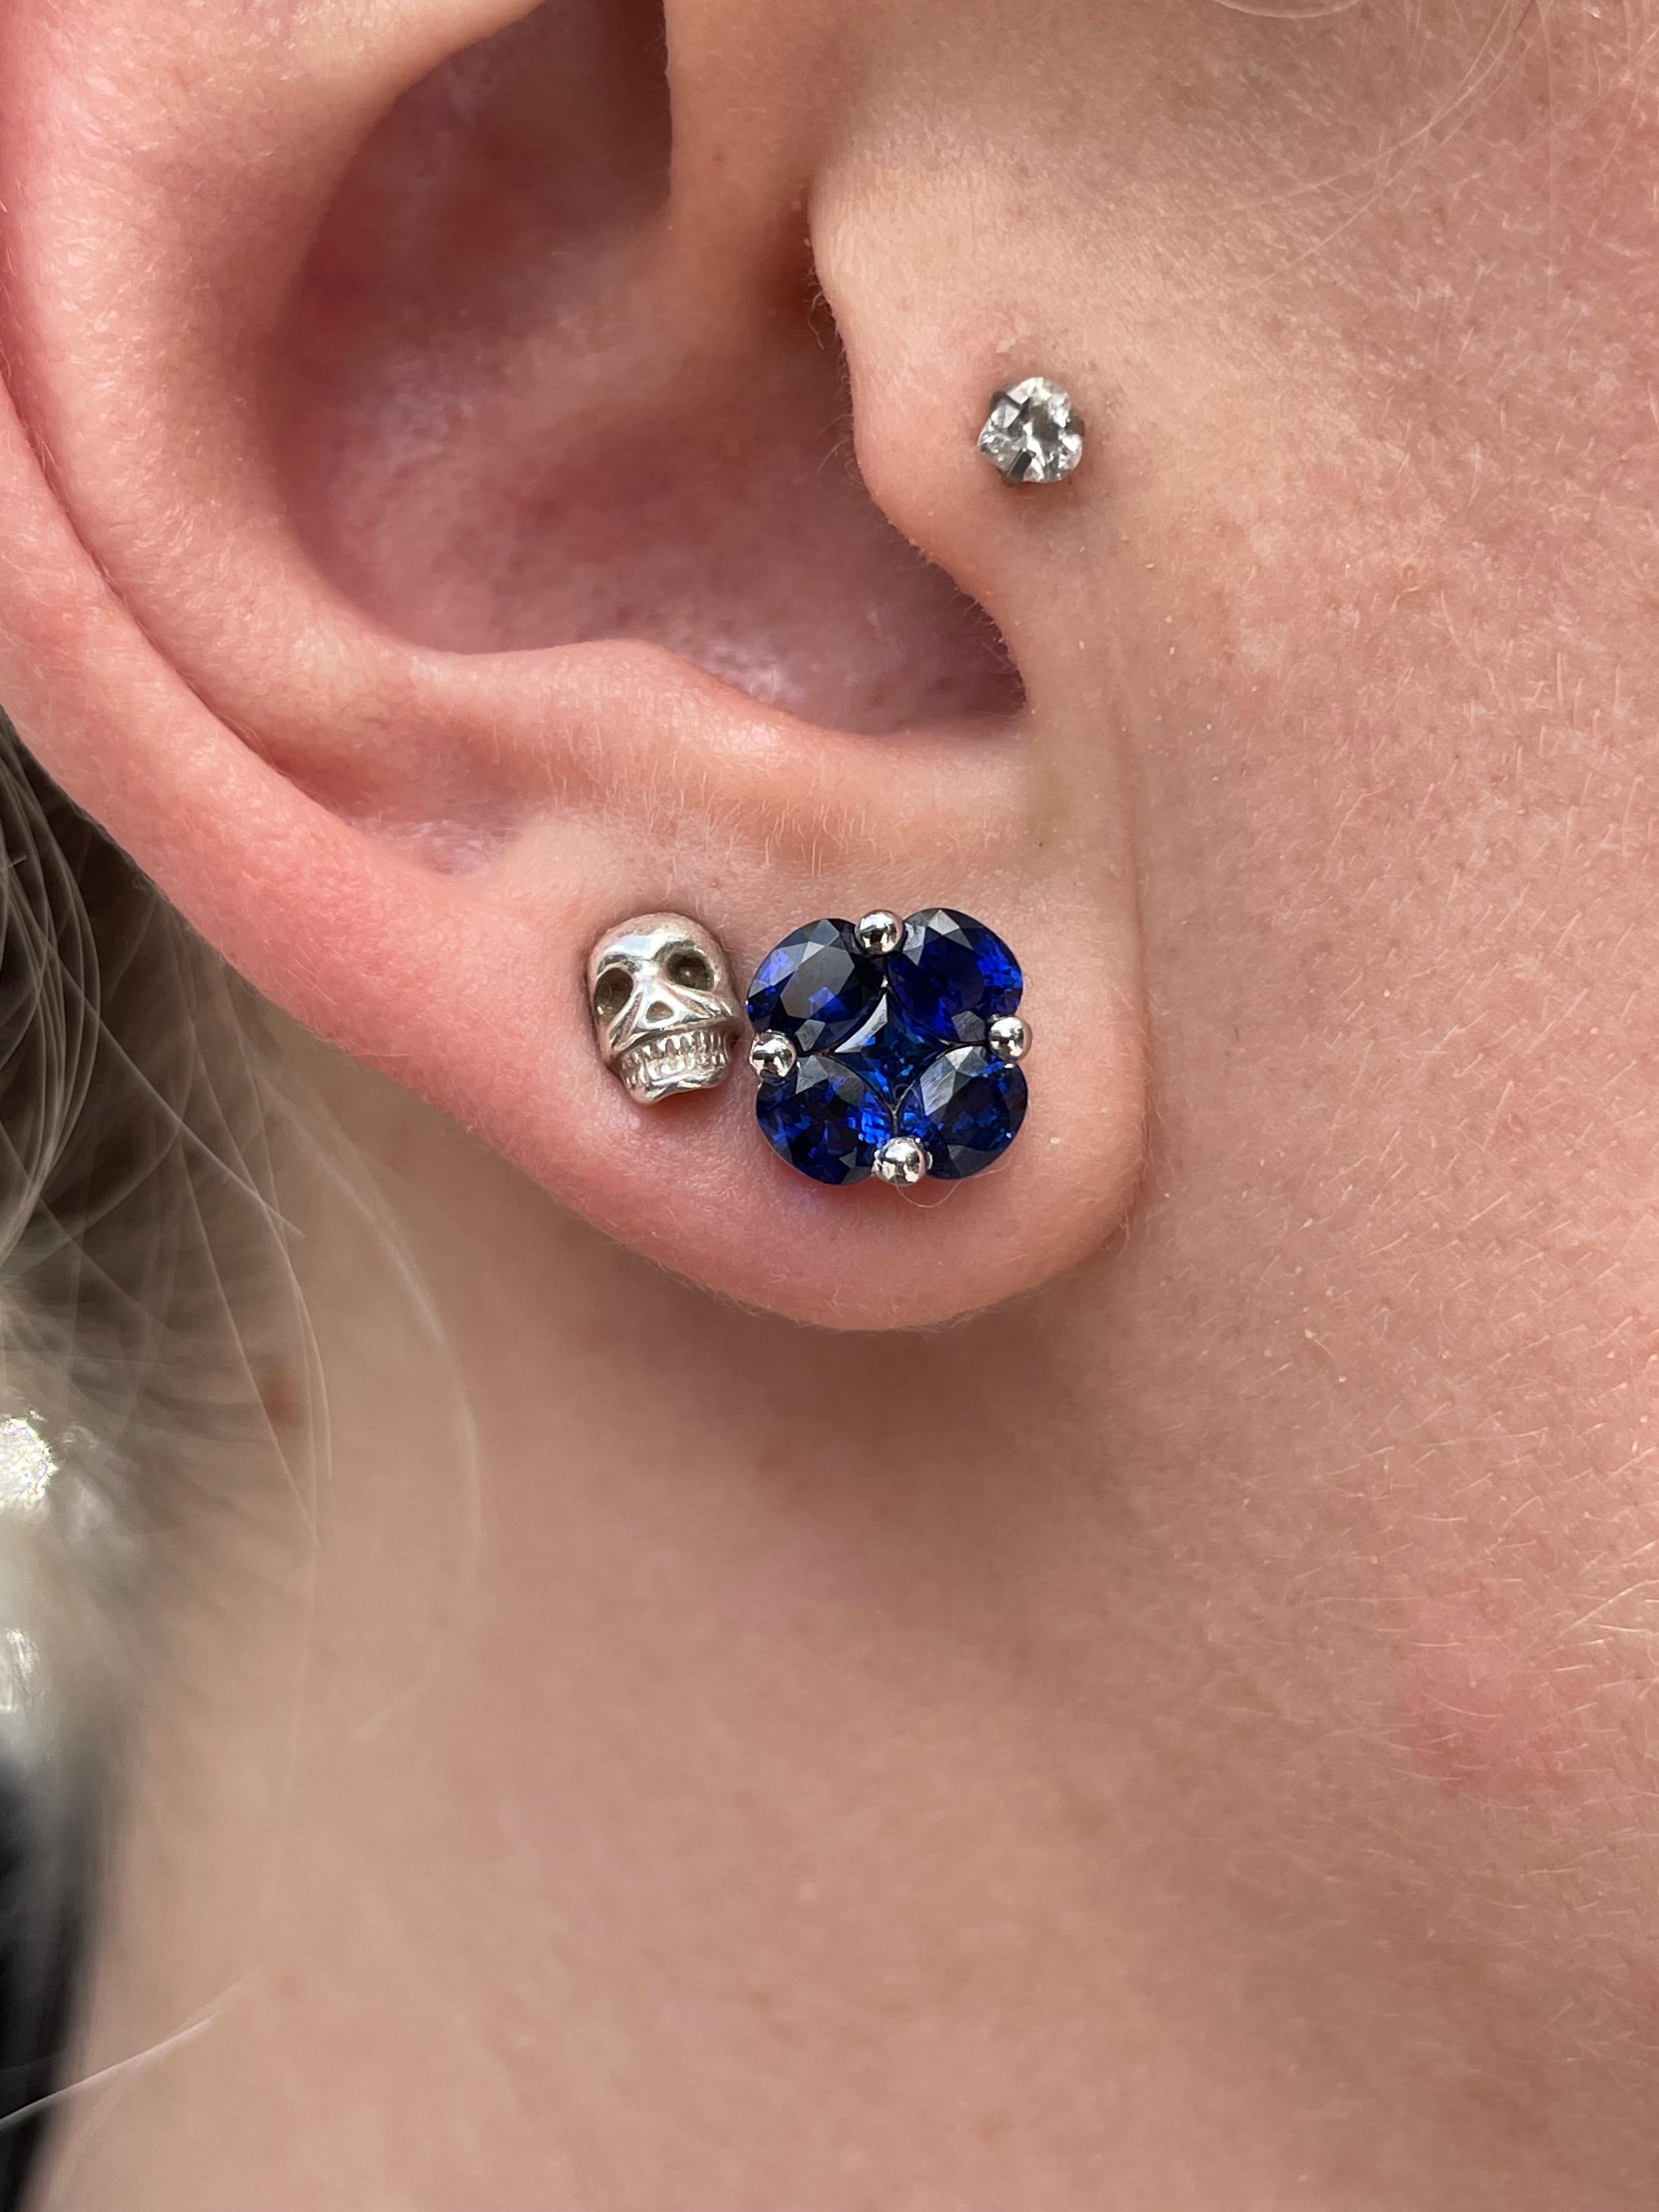 These beautiful earrings are crafted of 18 karat white gold with 10 blue sapphires weighing 2.75 carat total weight.